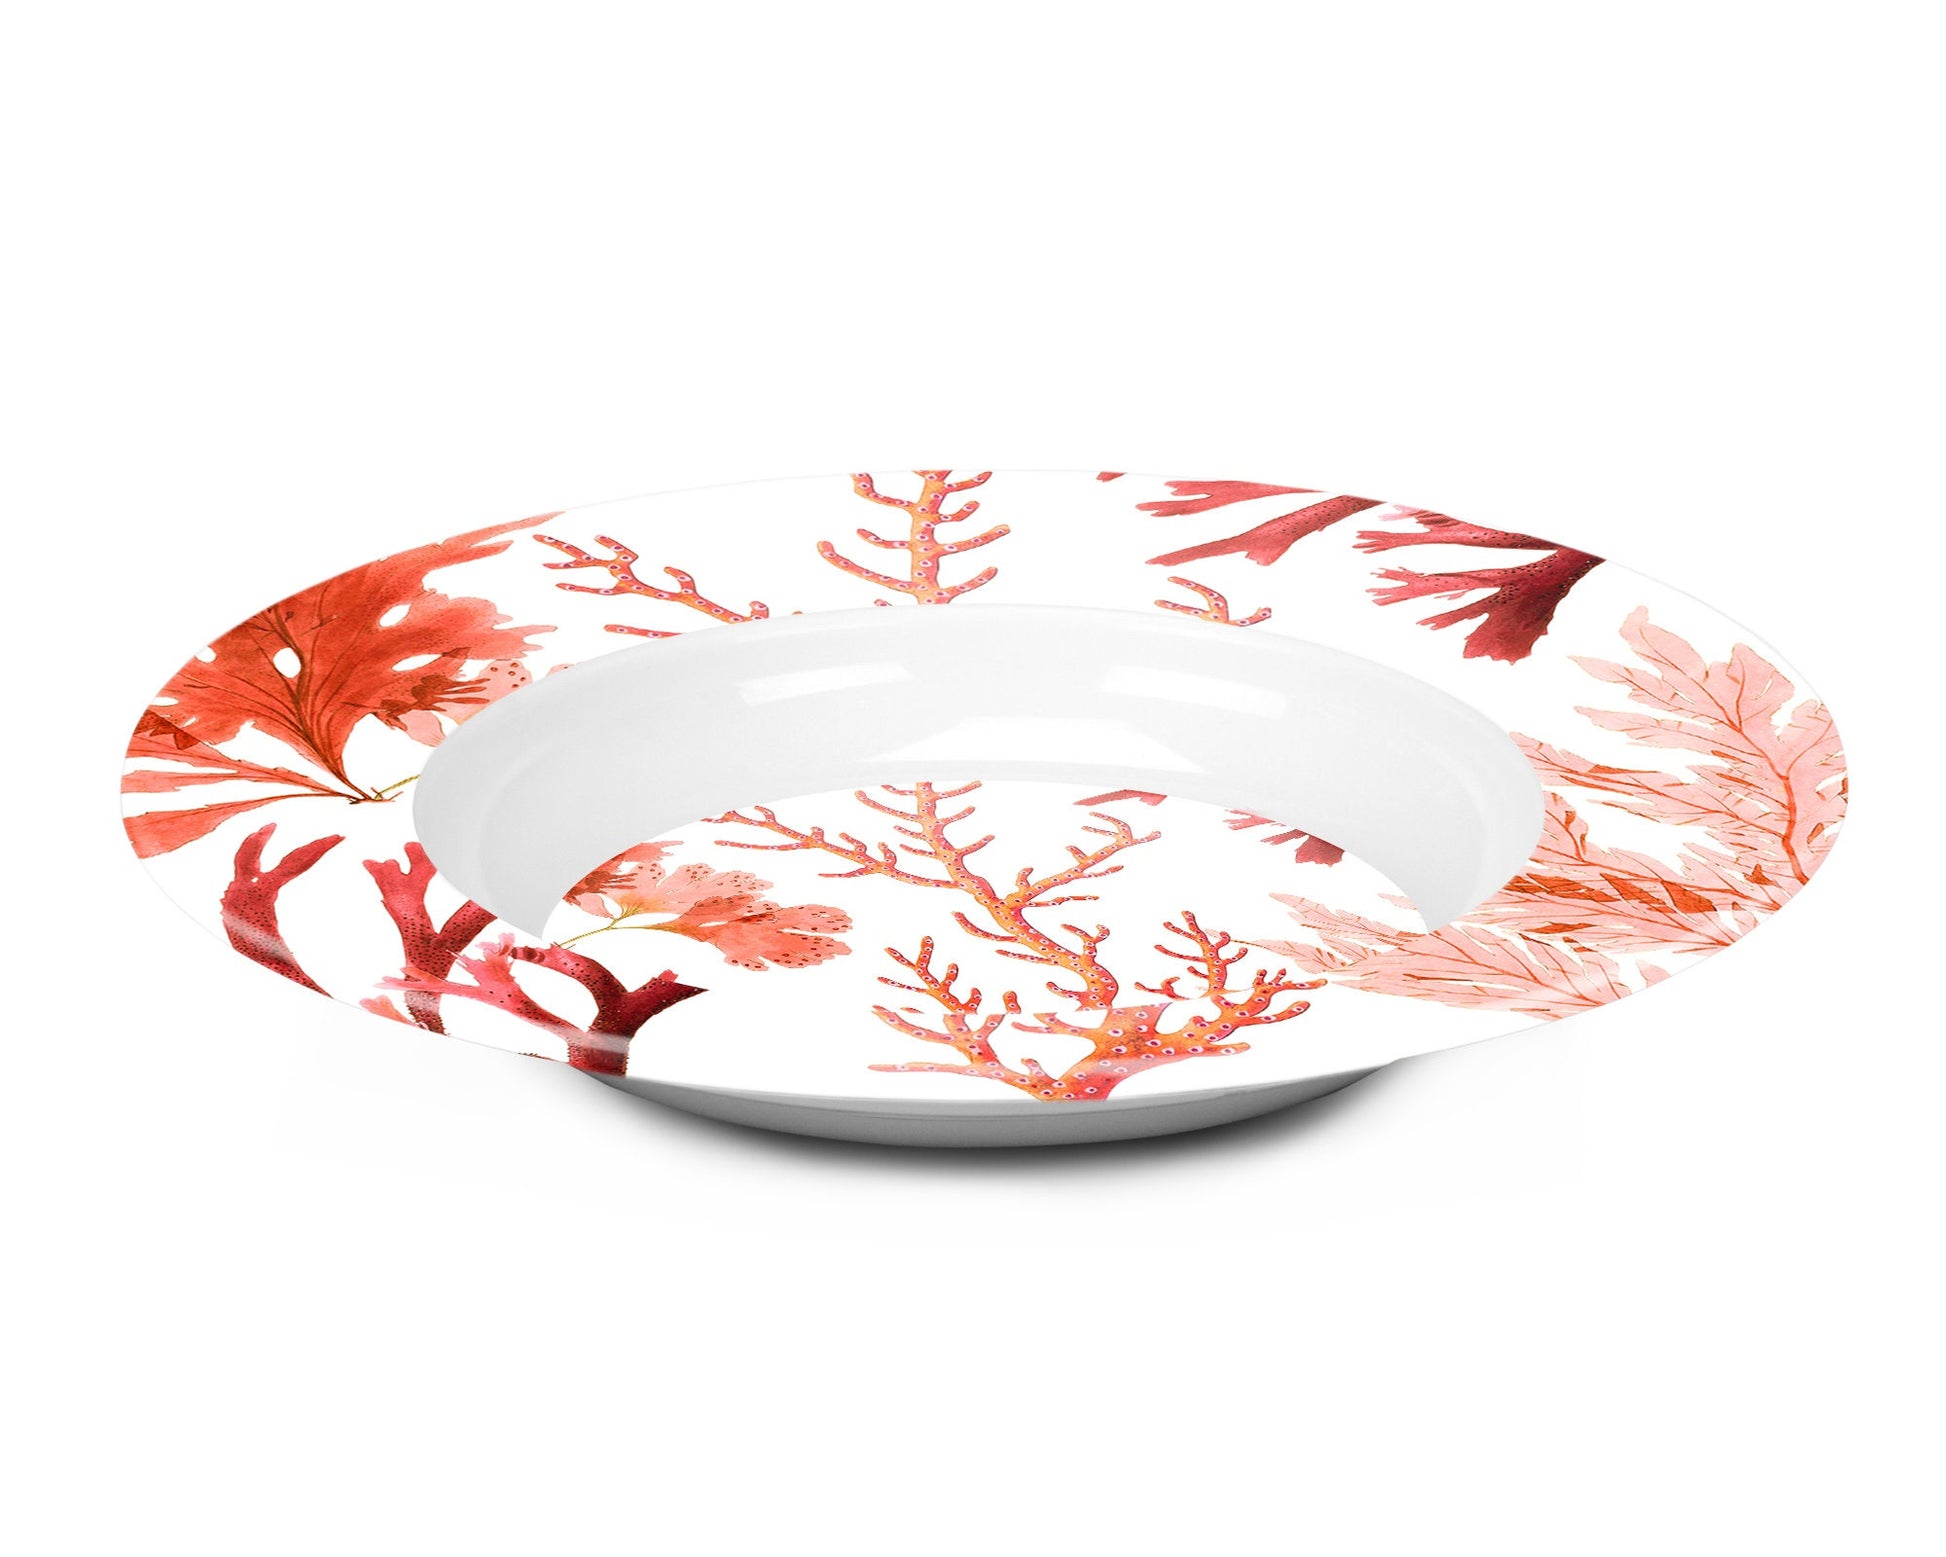 Oceanic Beach Theme Bowls with Sea Coral print in White, pink, orange, red